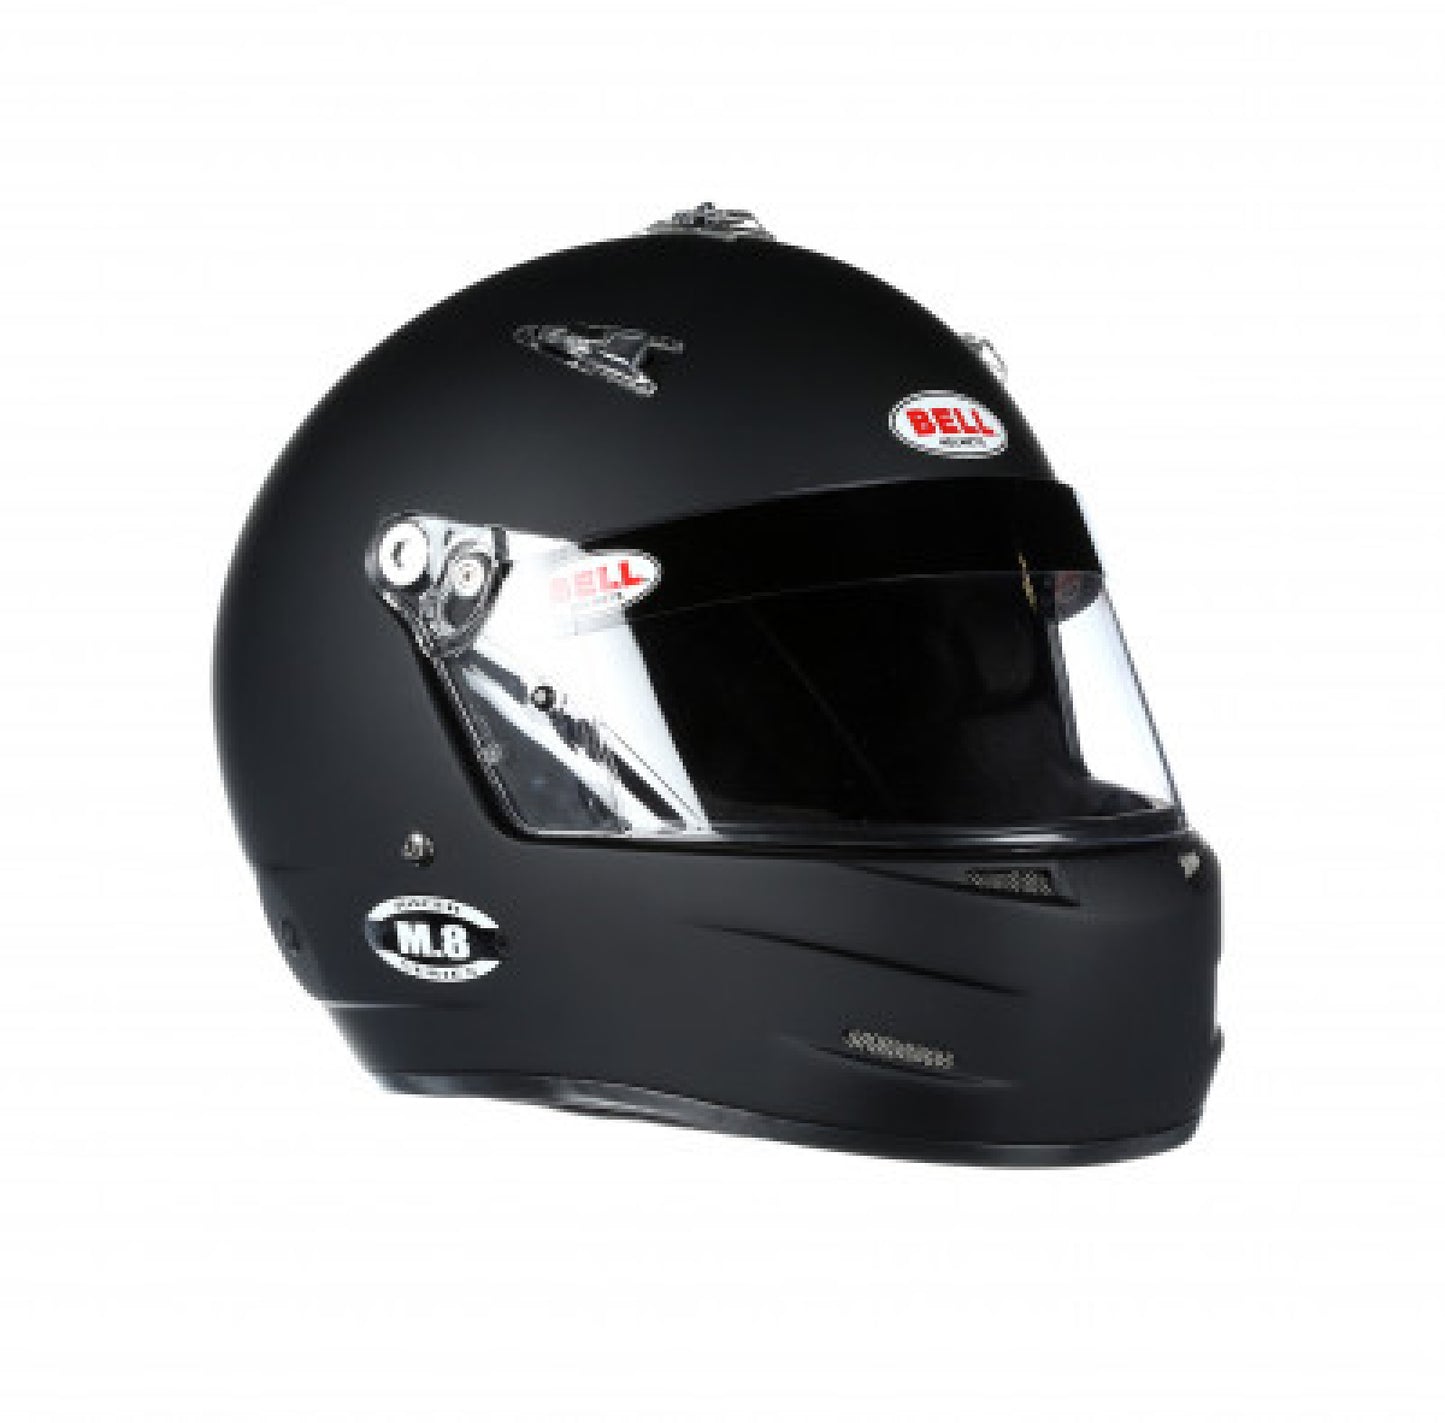 Bell M8 Racing Helmet-Matte Black Size 2X Extra Large 1419A17